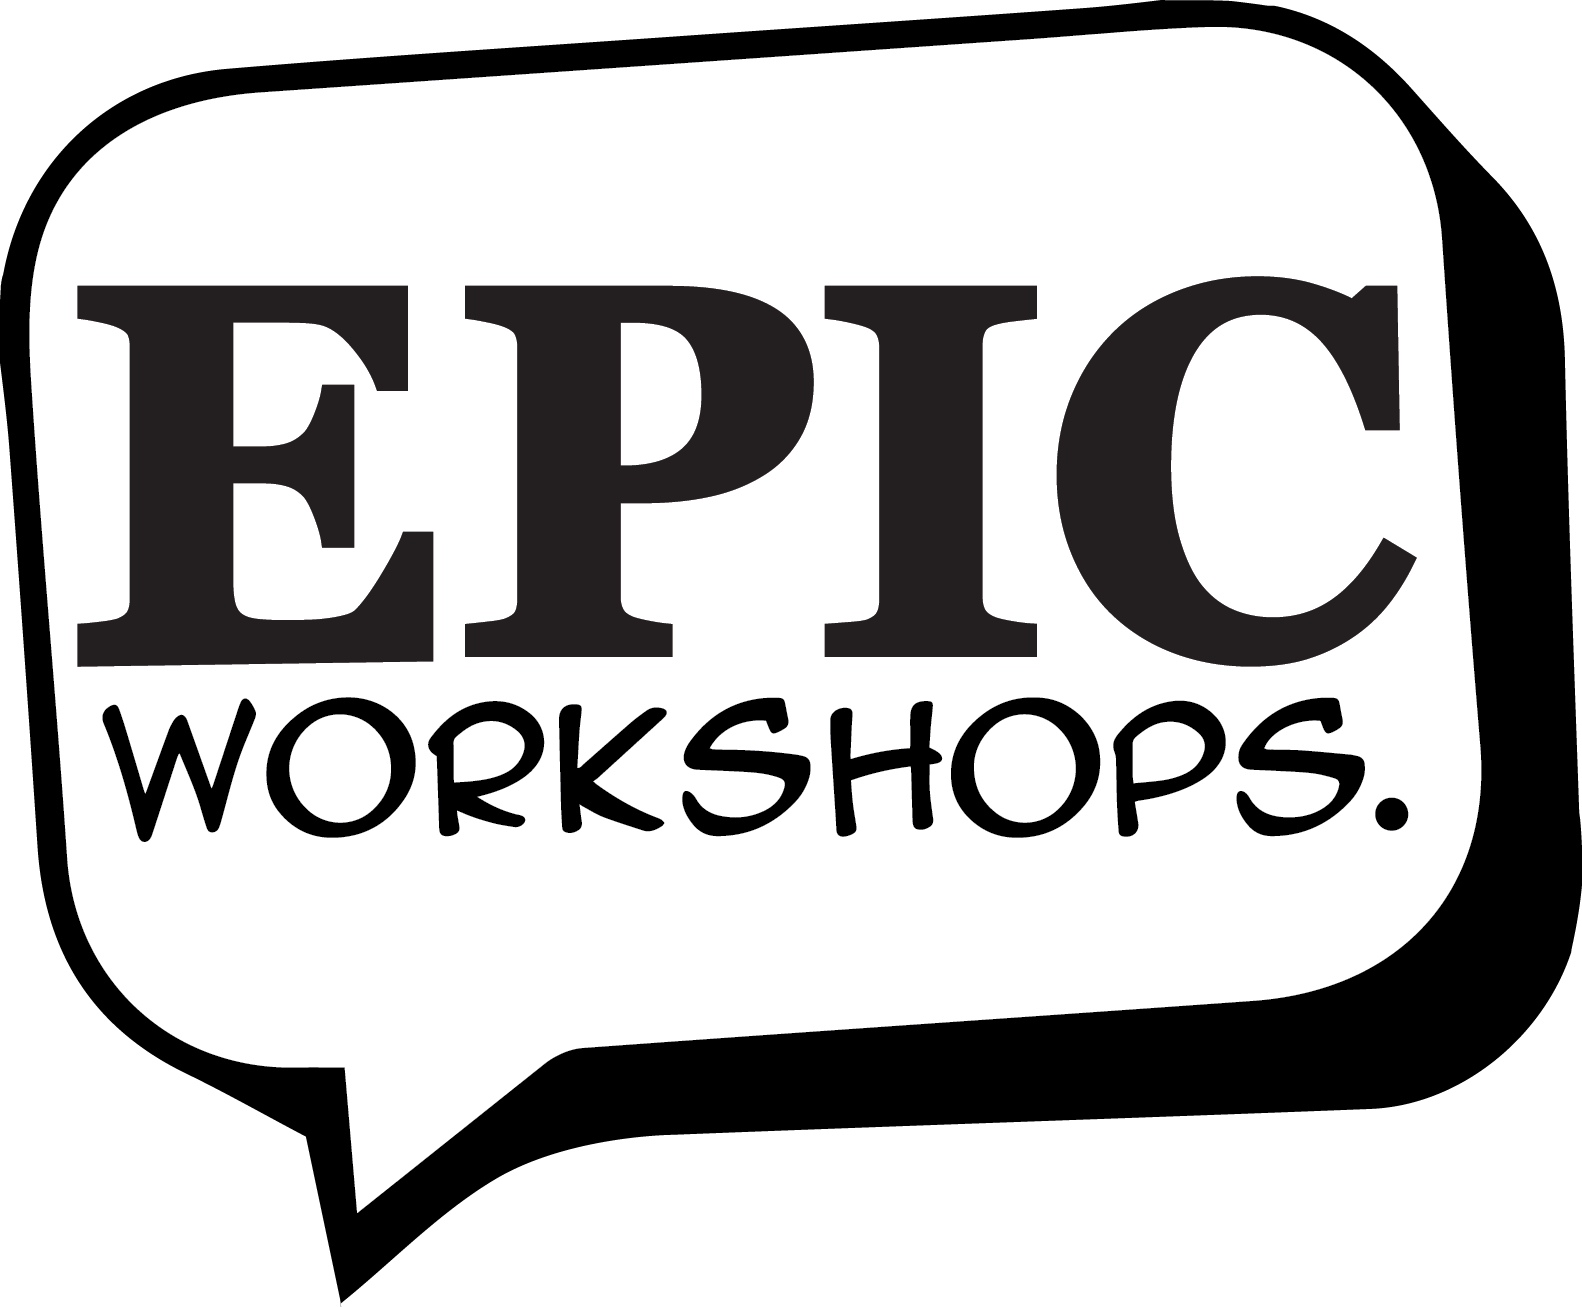 EPIC Workshops: Tote Bag Painting Experience Kit @ $30 - BYKidO